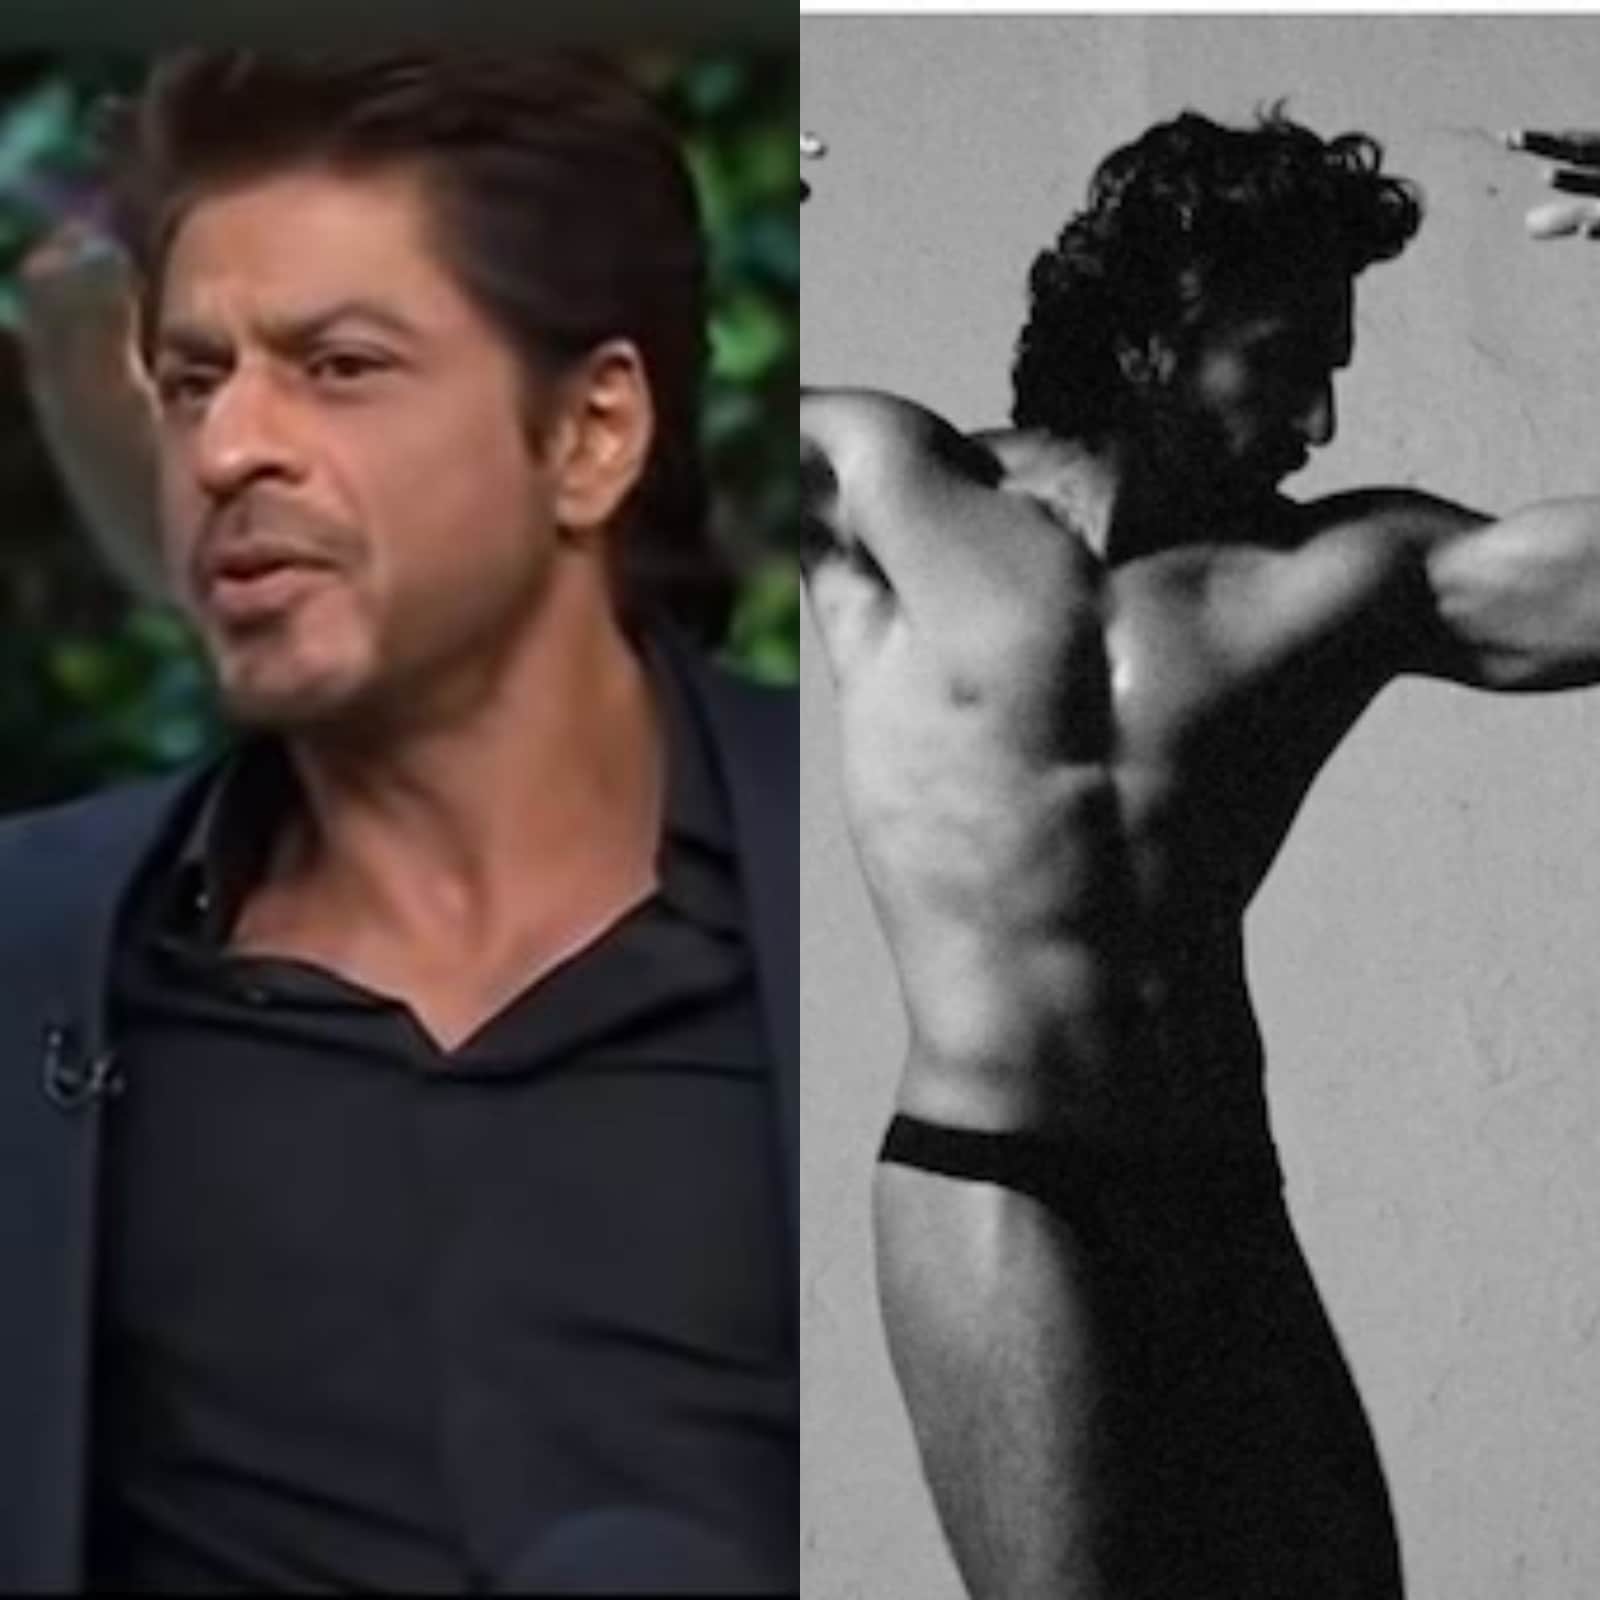 Ranveer Singh has been bizarrely embroiled in a needless obscenity case  over his recent nude photoshoot, but even more bizarrely prophetic is how  Shah Rukh Khan had predicted this to Karan Johar